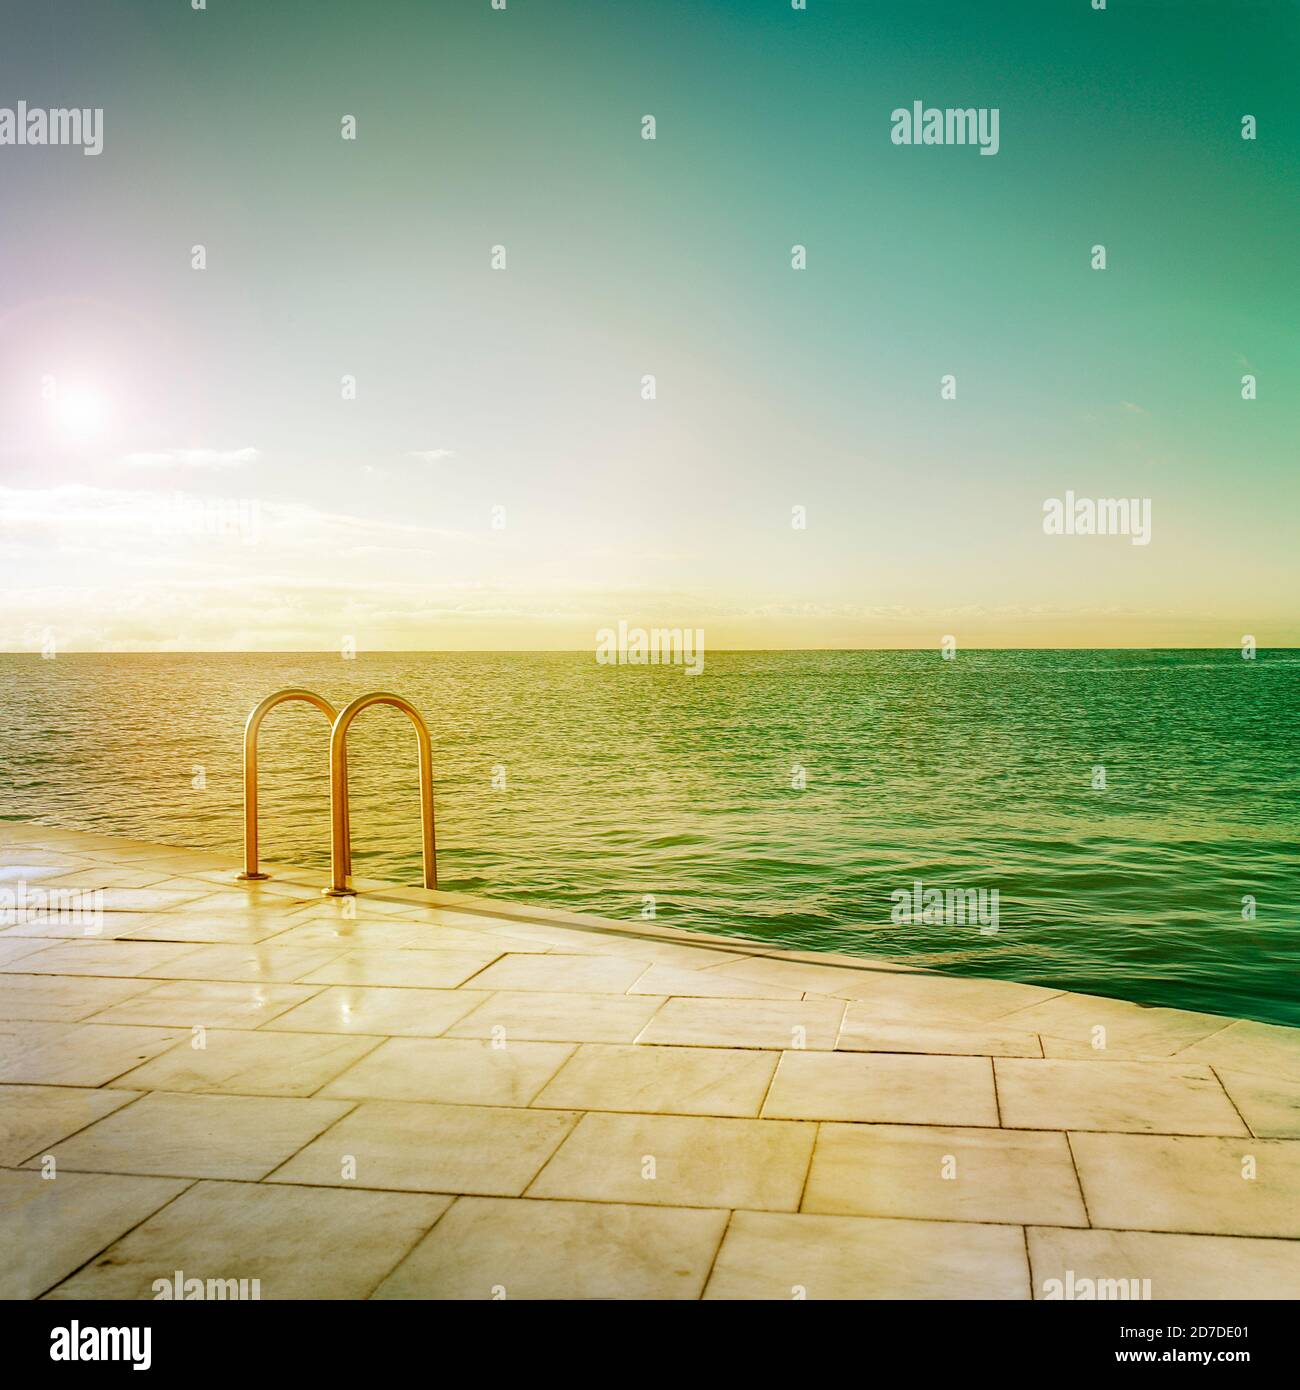 Seascape in front of swimming sea-pool border. Warm stylized edition adding vintage look. Stock Photo